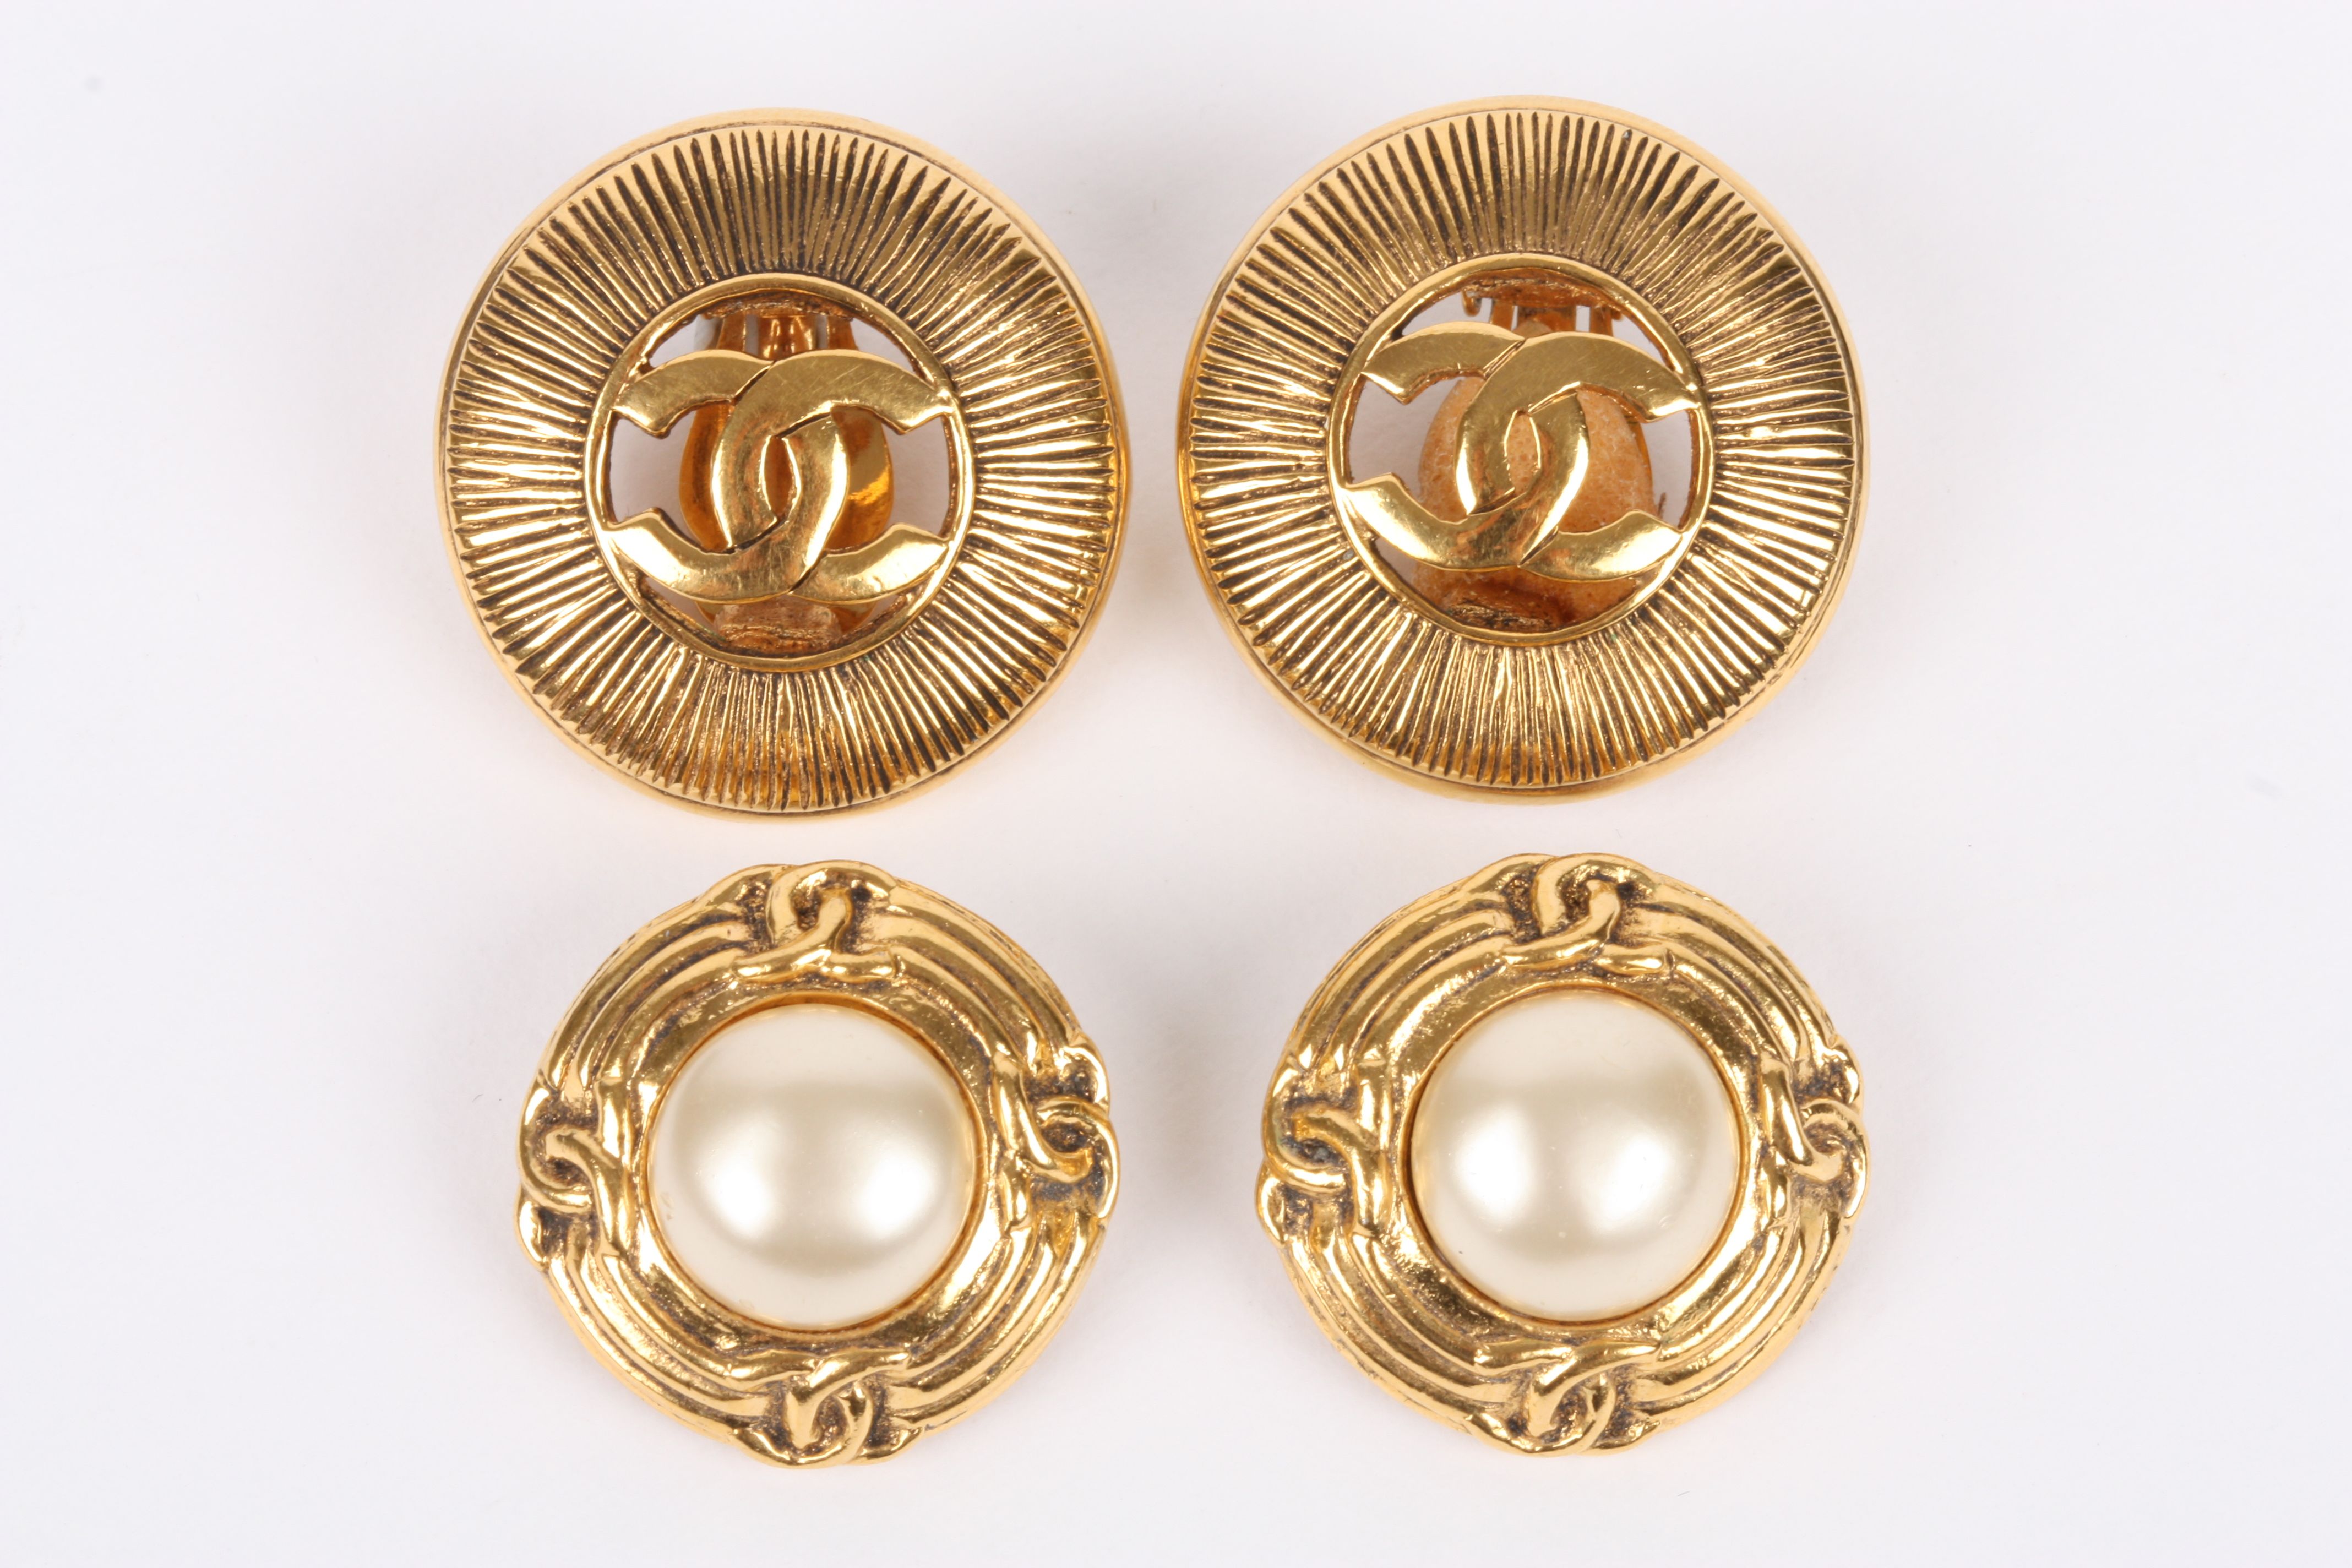 A pair of Chanel vintage clip earrings with large central pearl within a Chanel logo frame. Spring